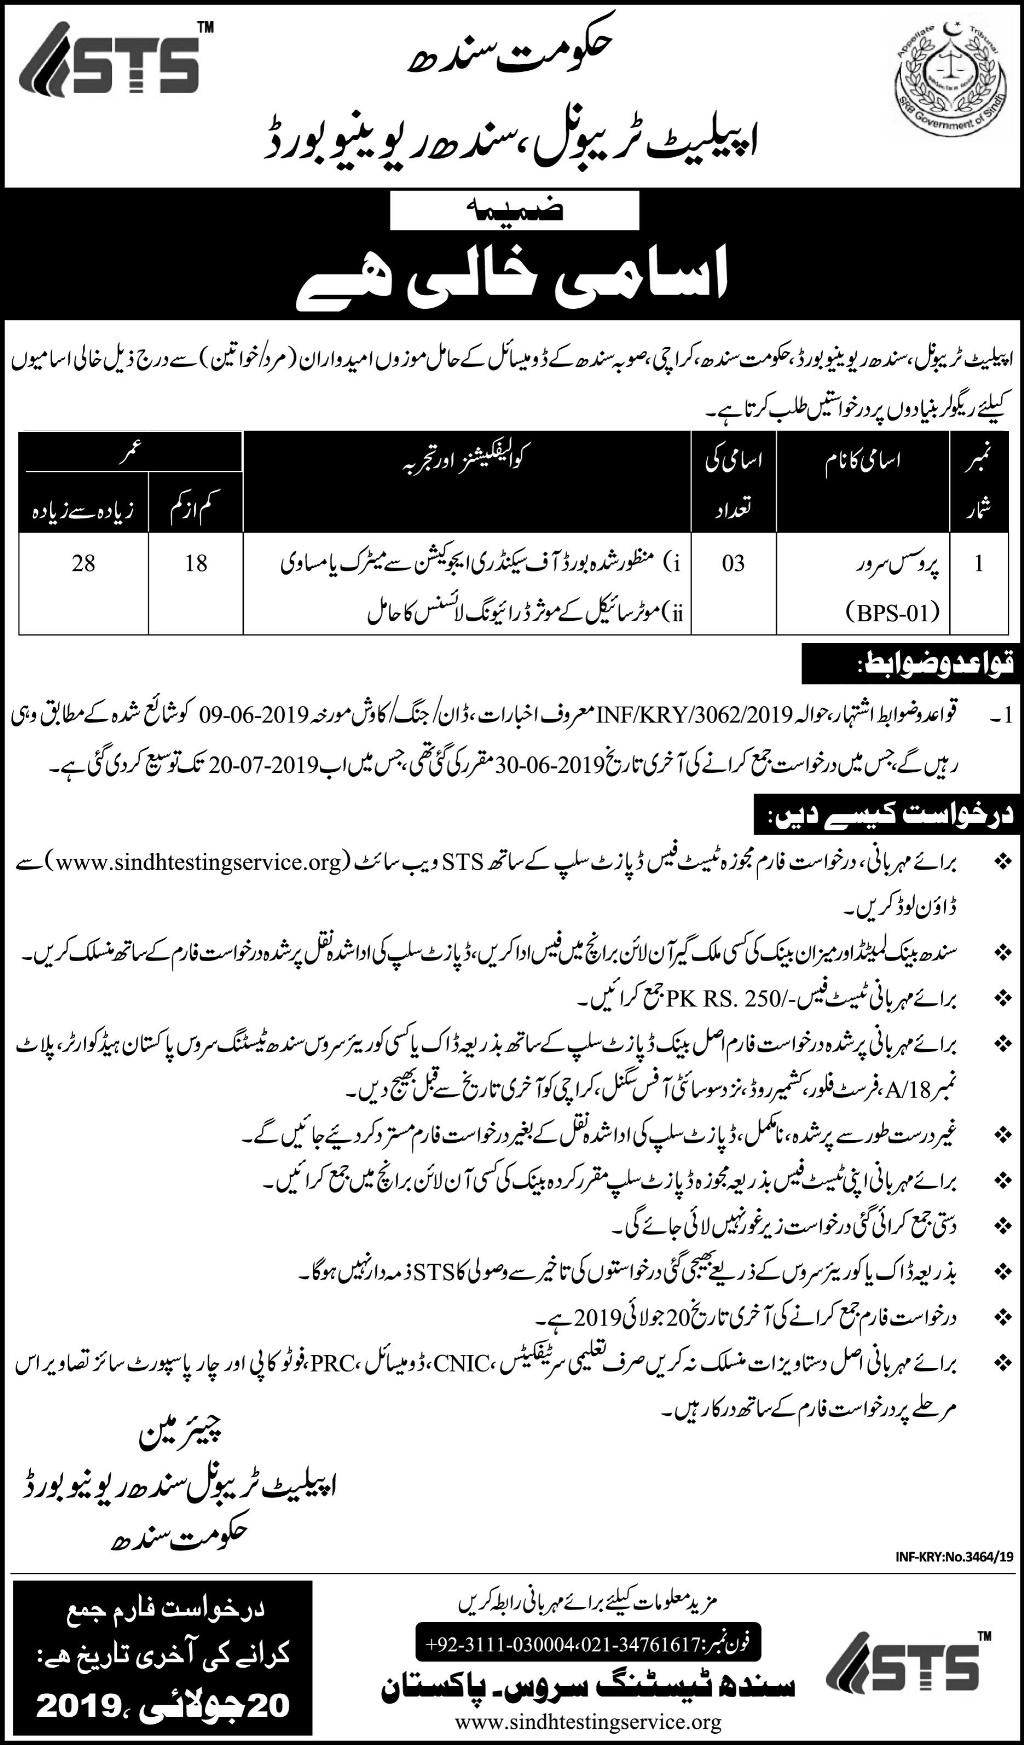 appellate tribunal sindh revenue board government of sindh jobs